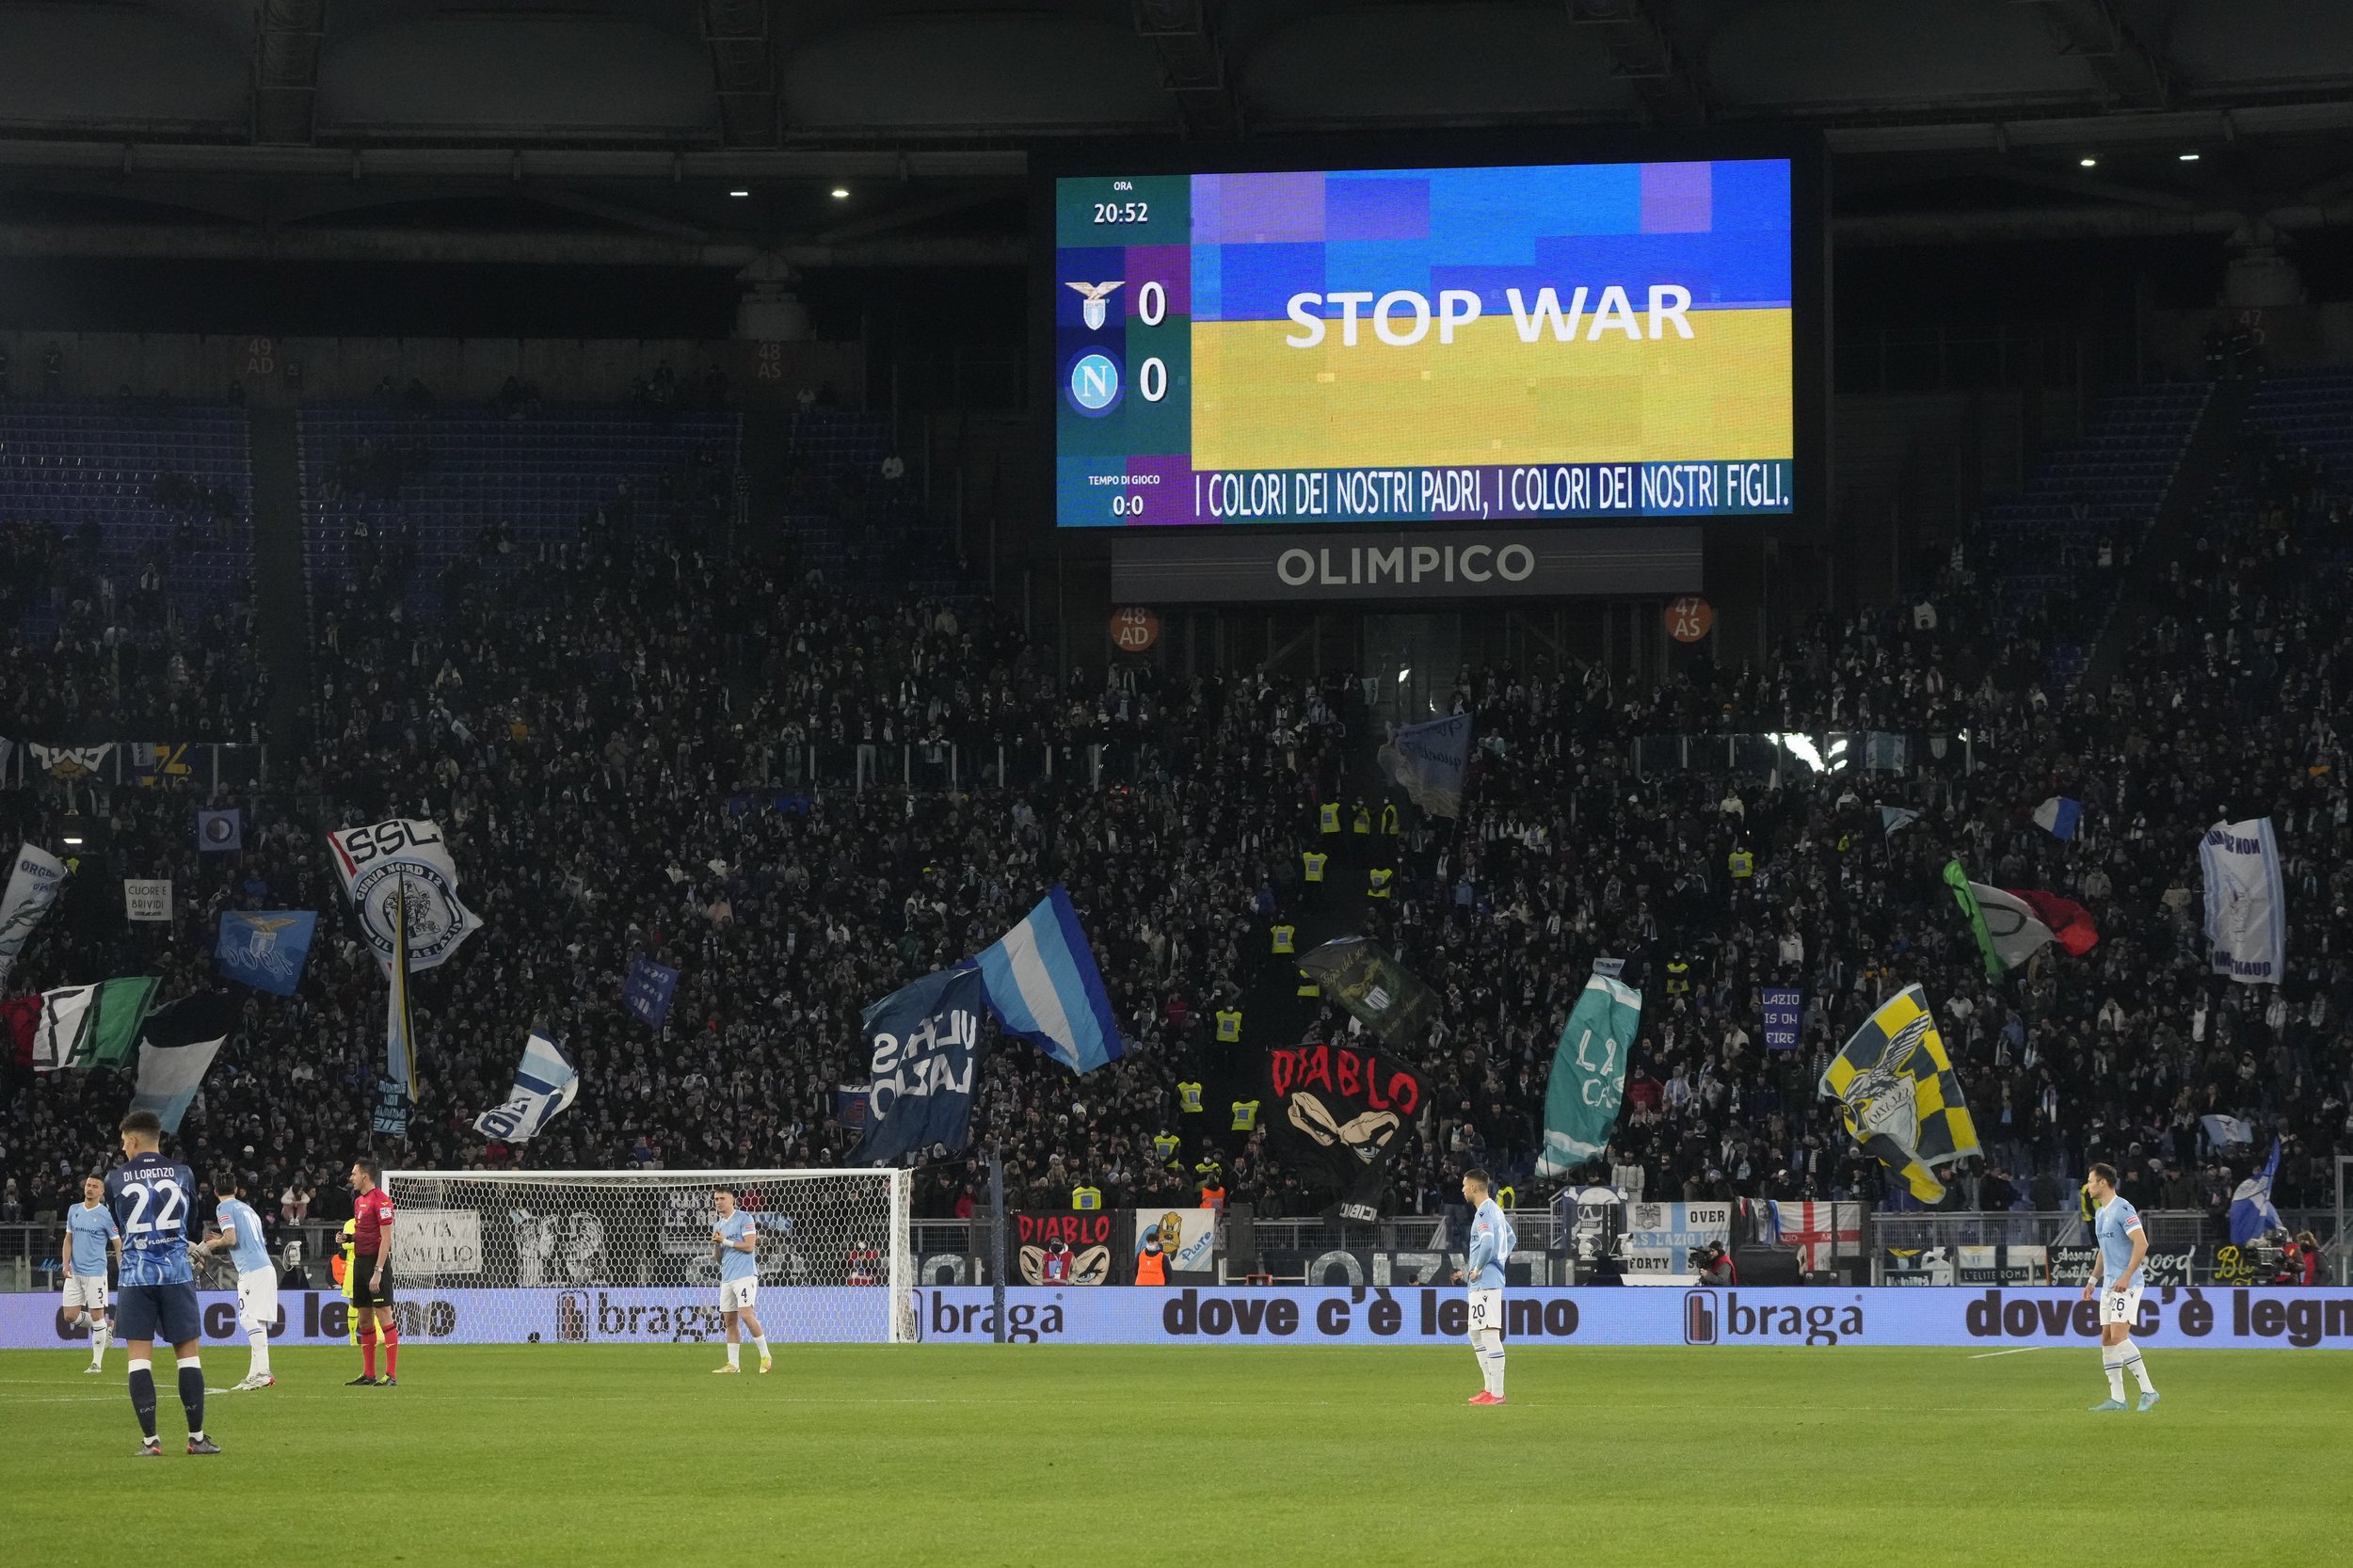  Ukraine's flag is displayed on a giant screen prior to the start of the Serie A soccer match between Lazio and Napoli at Rome's Olympic stadium, Sunday, Feb. 27, 2022. (AP Photo/Gregorio Borgia) 